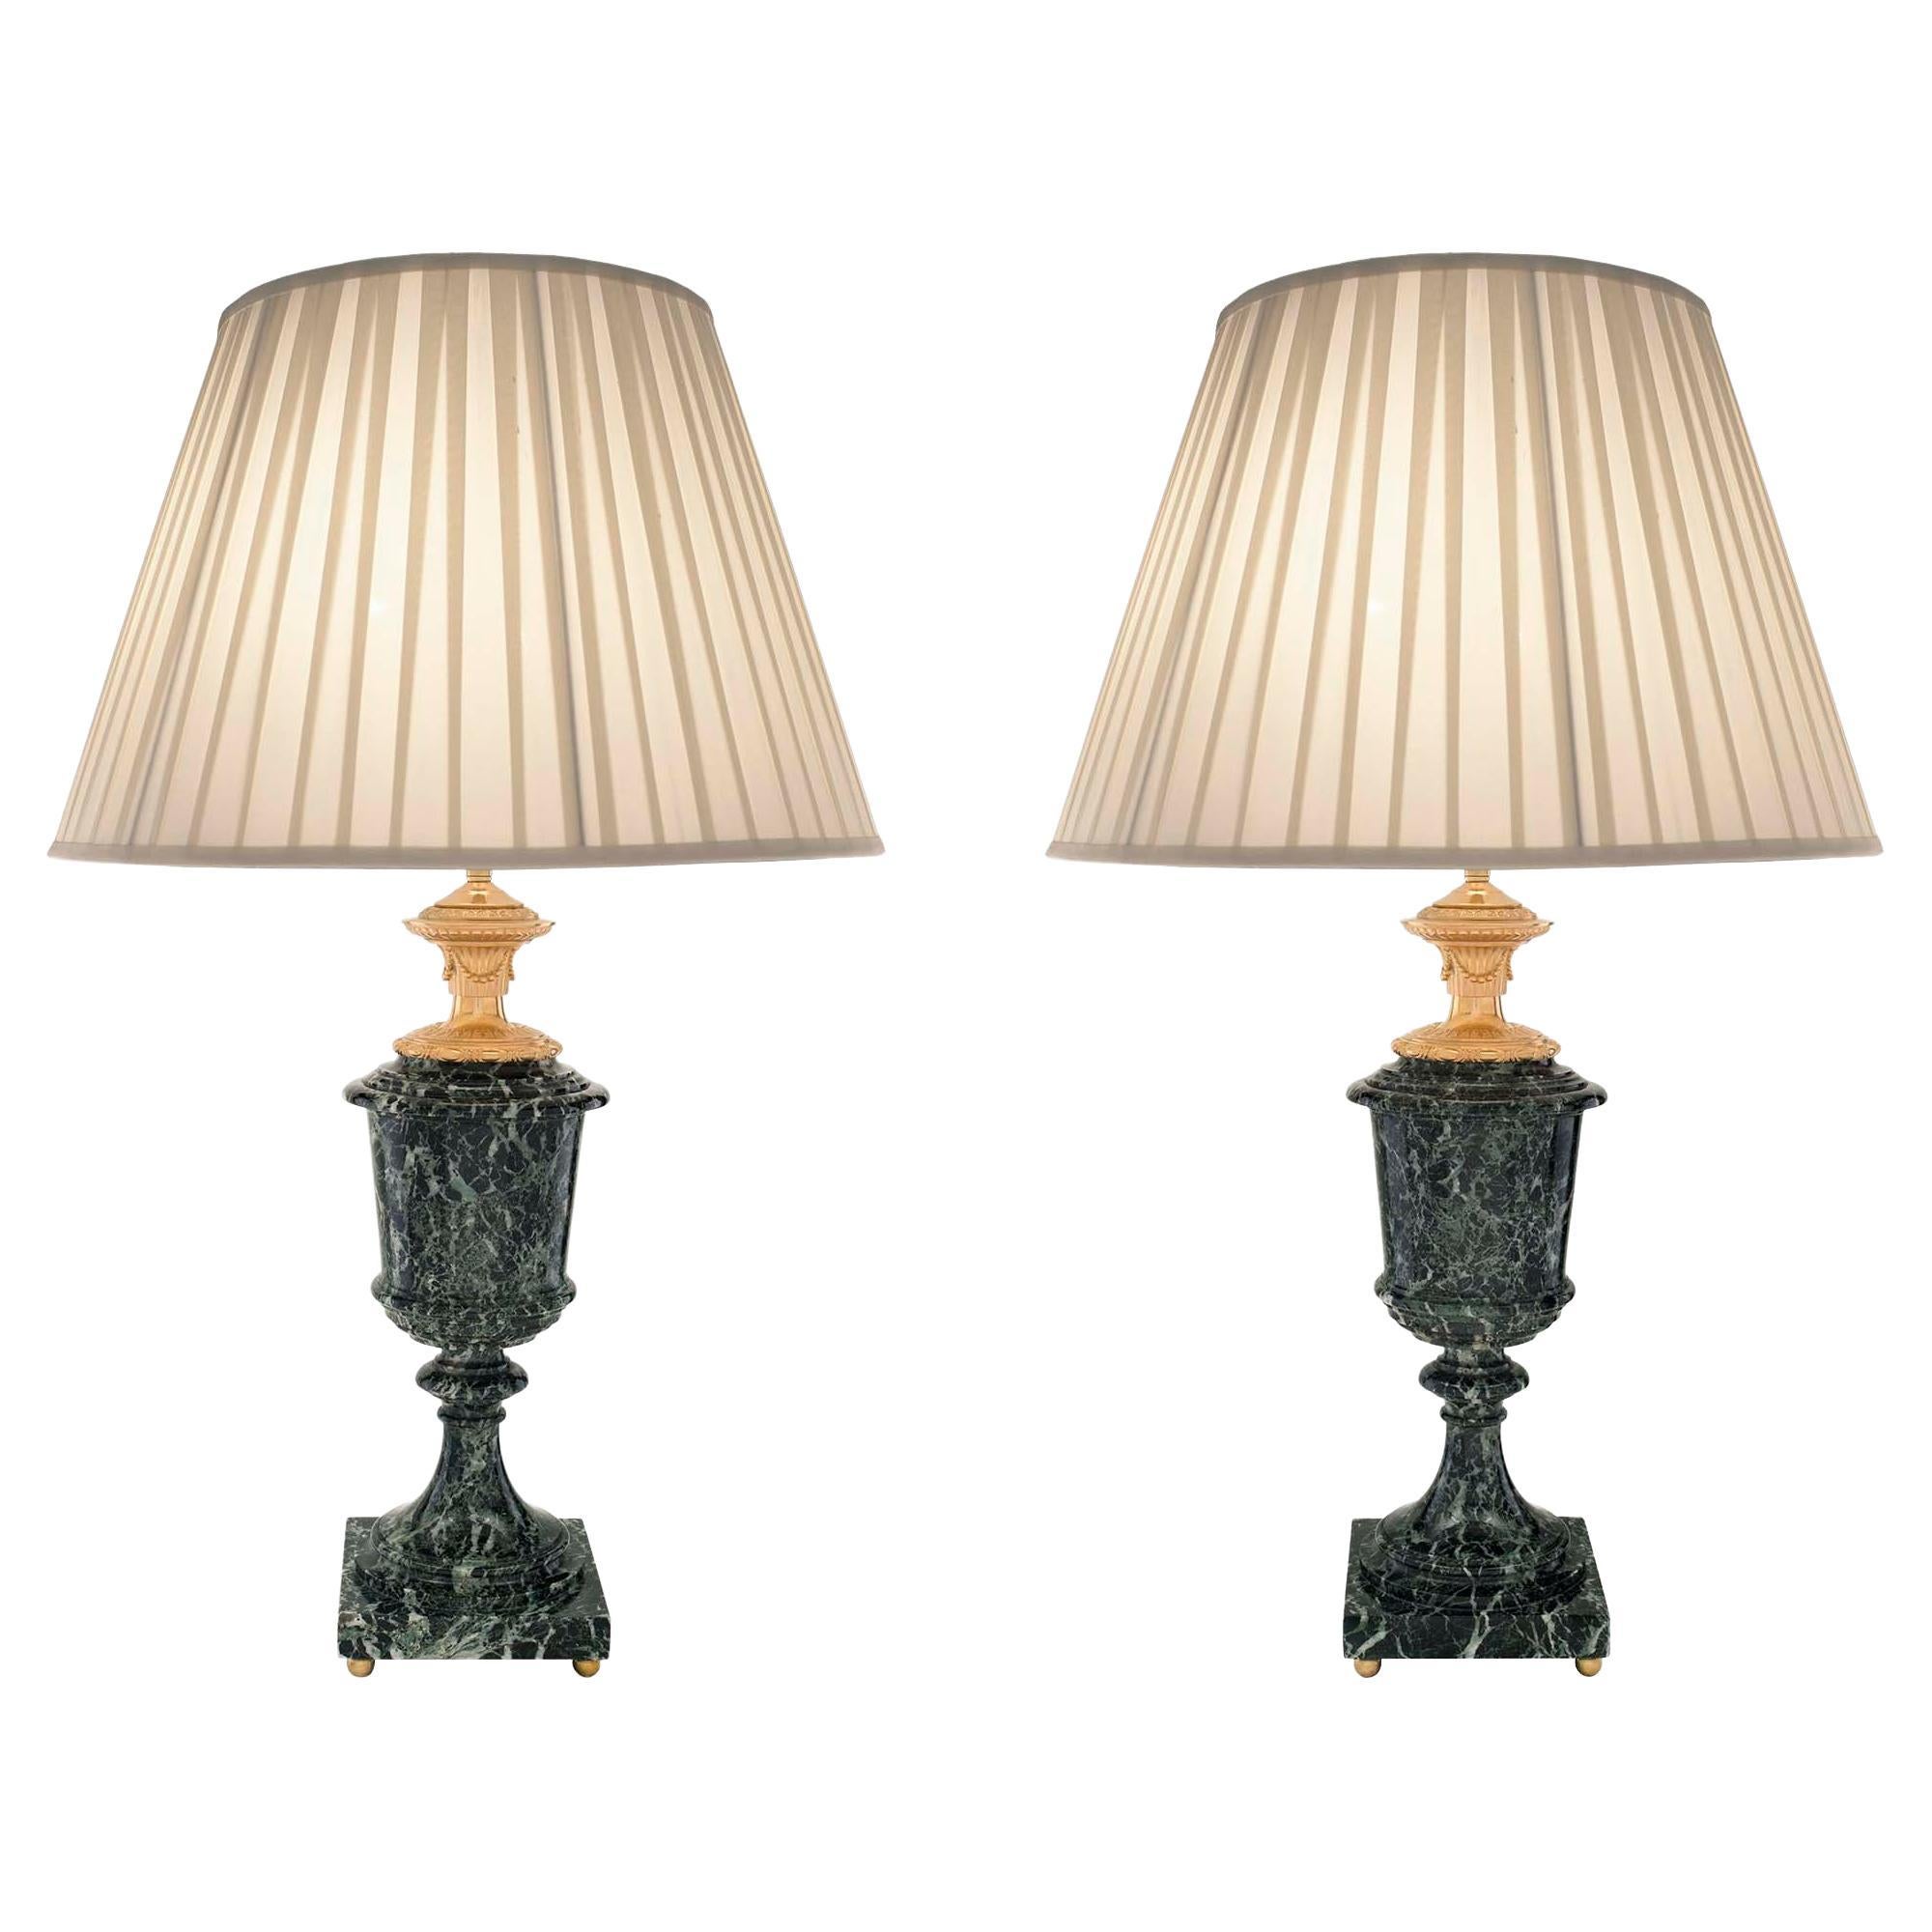 Pair of 19th Century Louis XVI Style Vert Patricia Marble and Ormolu Lamps For Sale